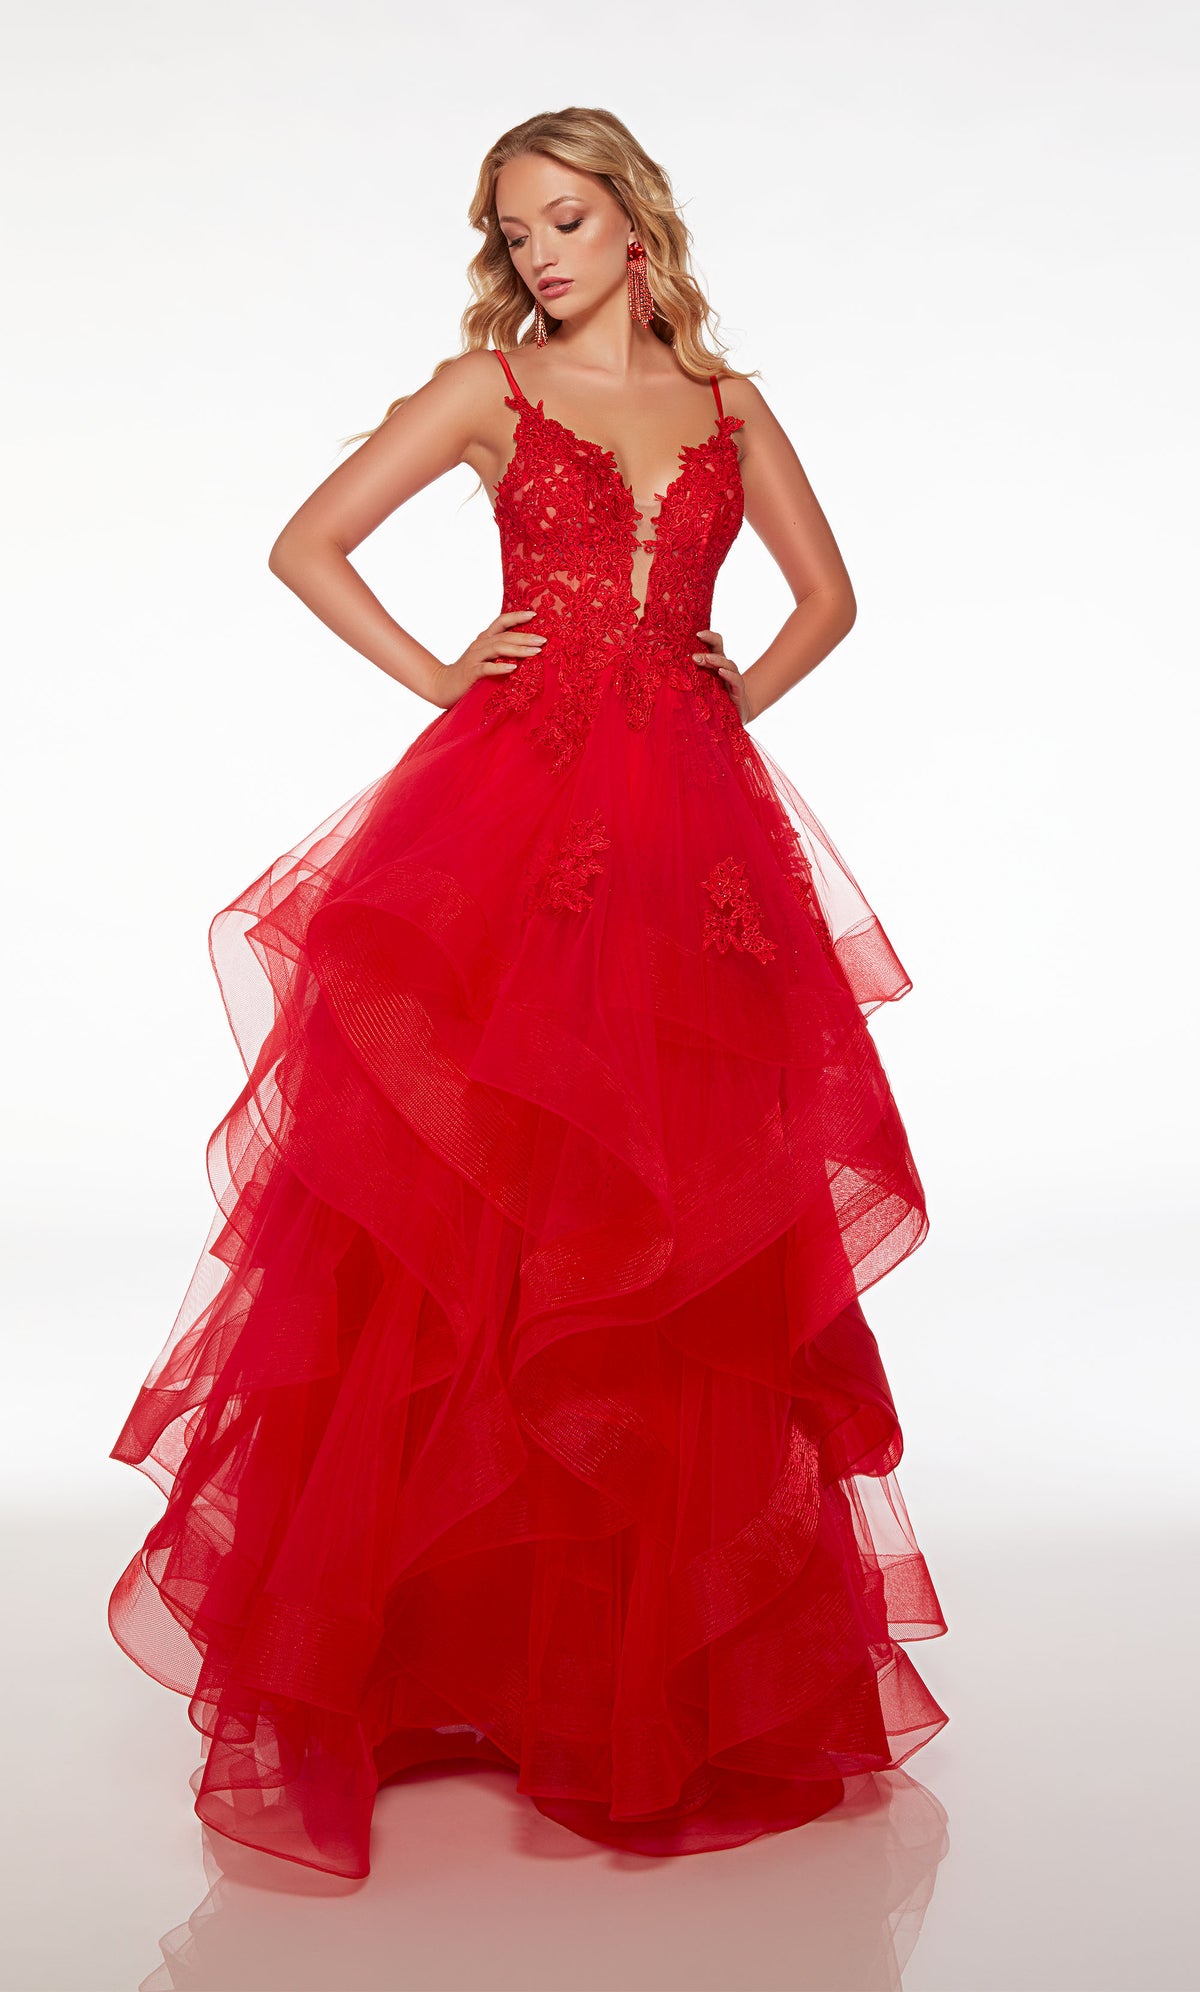 Lipstick red ball gown spotlighting an sheer lace corset top, ruffled tulle skirt, strappy open back, and floral lace appliques for an fiery yet romantic vibe.